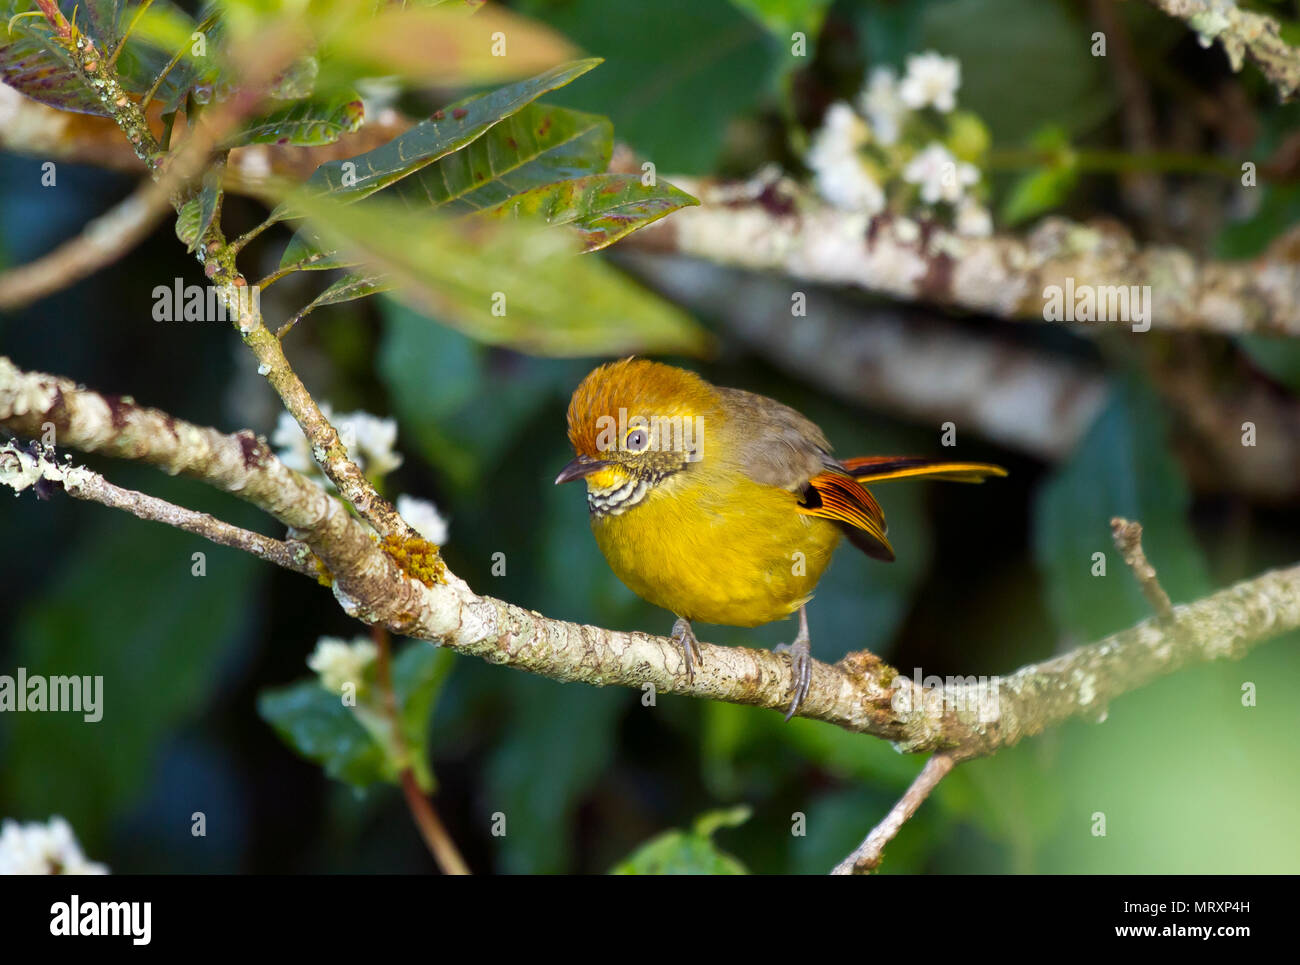 Chestnut-tailed Minla (Minla strigula) sits on branch in tree, Doi Inthanon, Chiang Mai Province, Thailand Stock Photo